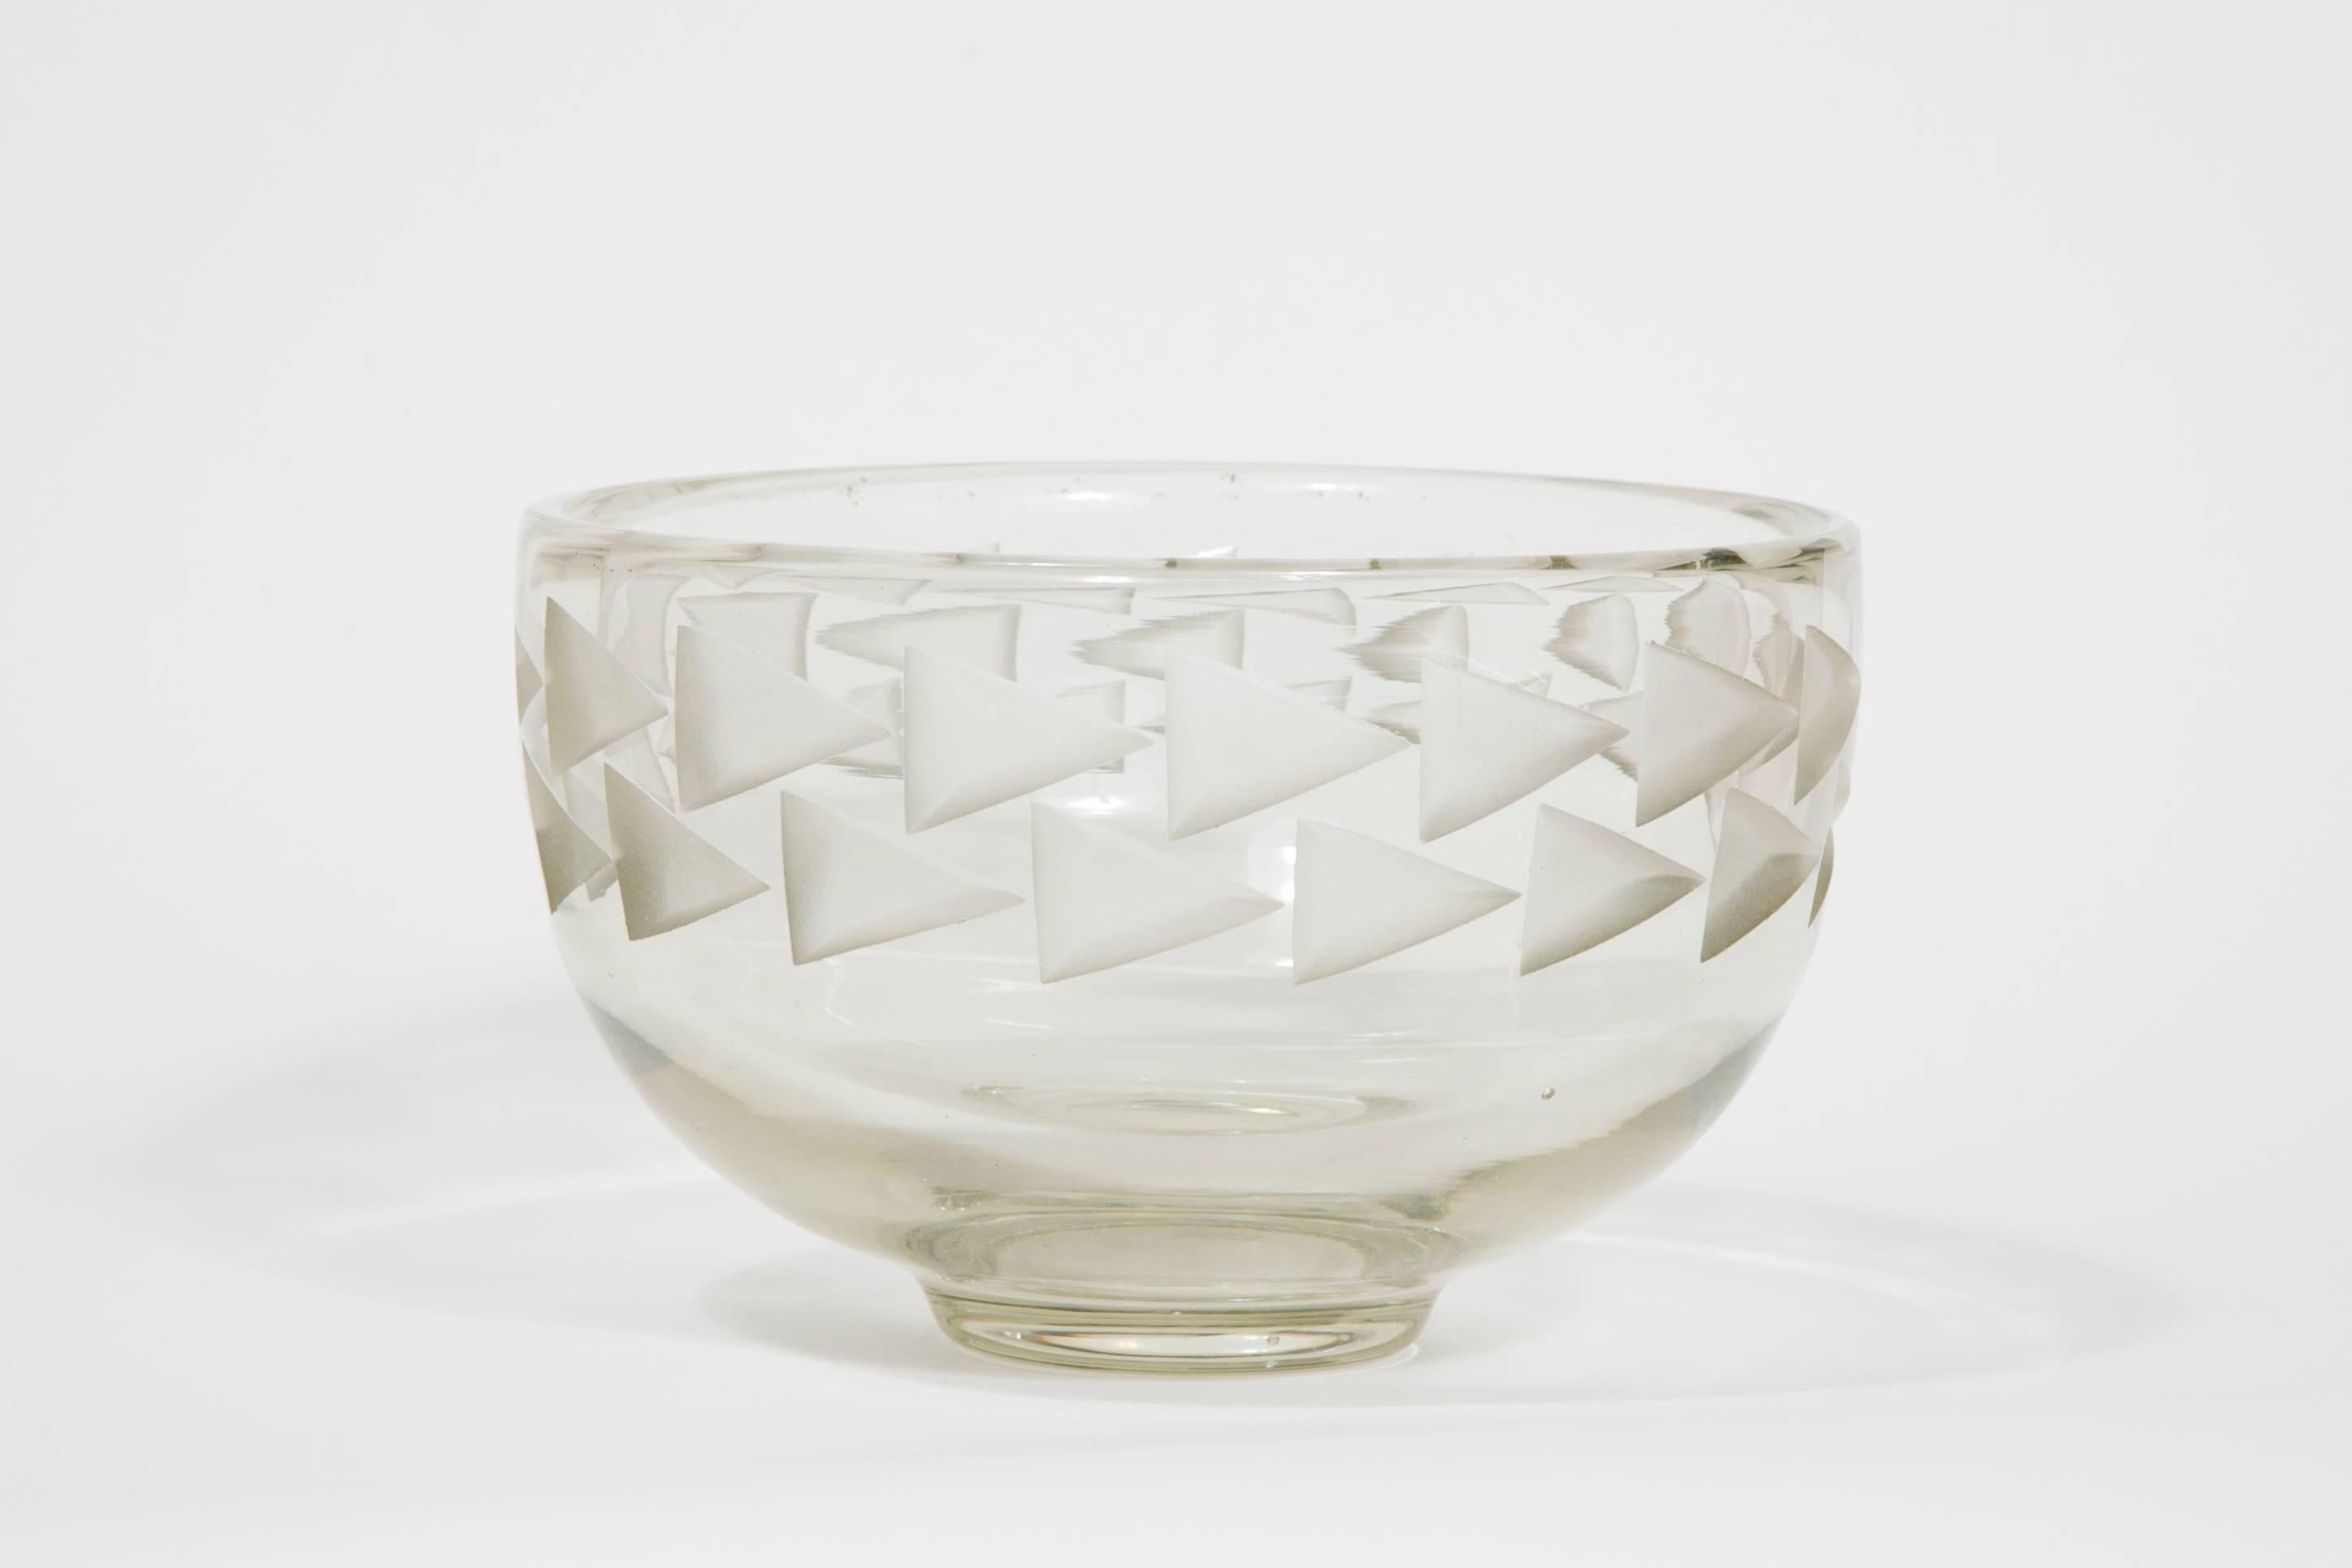 Elegant acid etched glass bowl by French designer Jean Luce (1895-1964)
member of the legendary and important movement UAM (the French Union of Modern Artists).